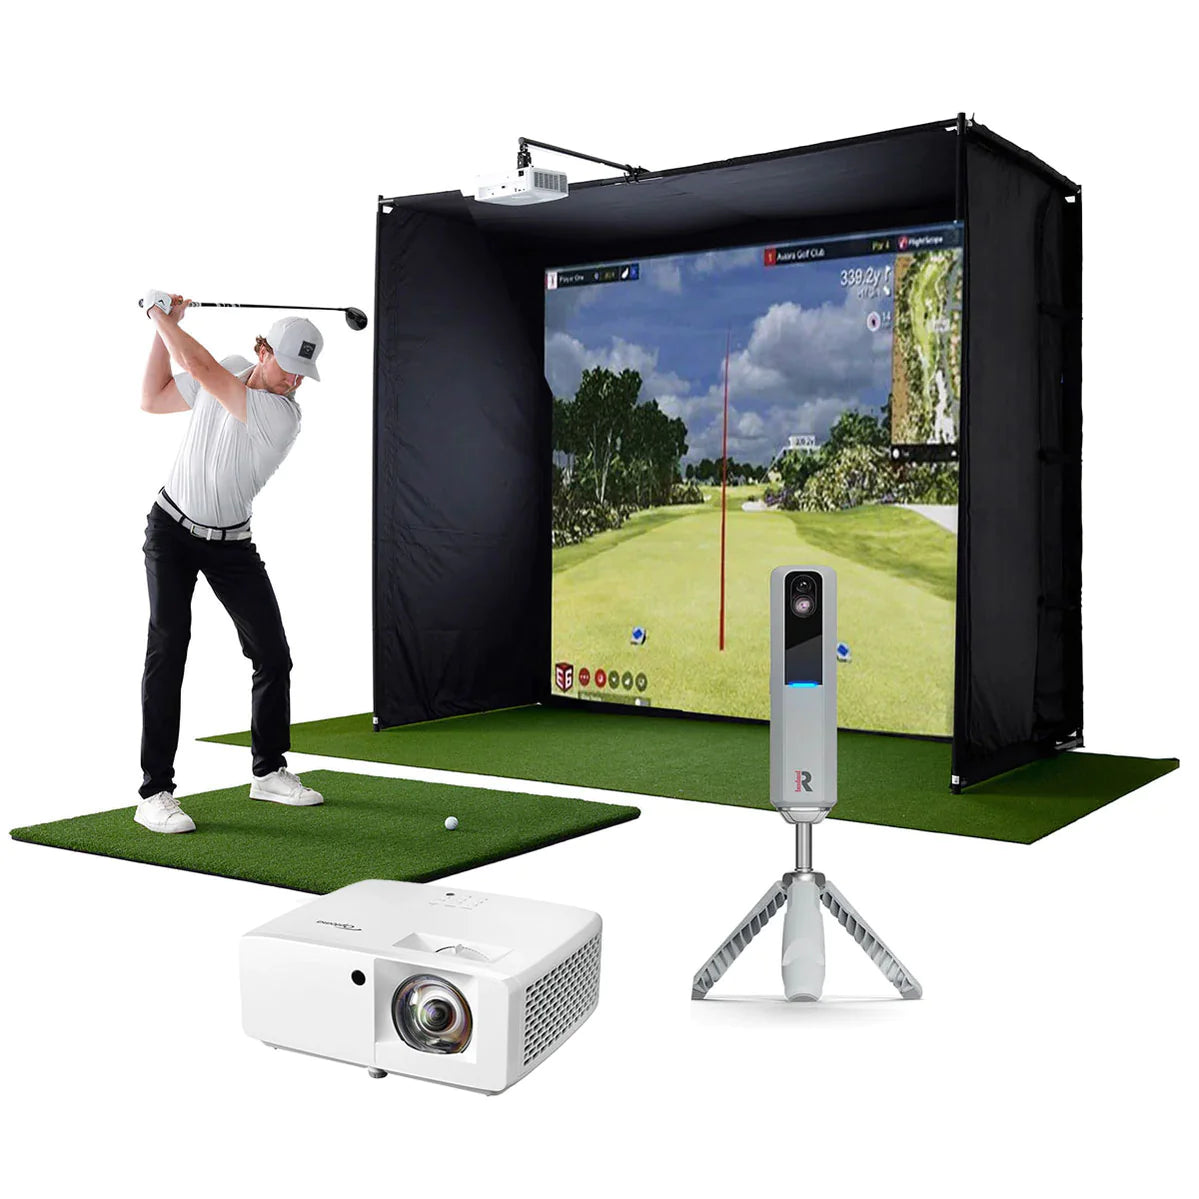 A golfer swinging in a PlayBetter Simstudio complet golf simulator with a Rapsodo MLM2PRO and projector in the foreground